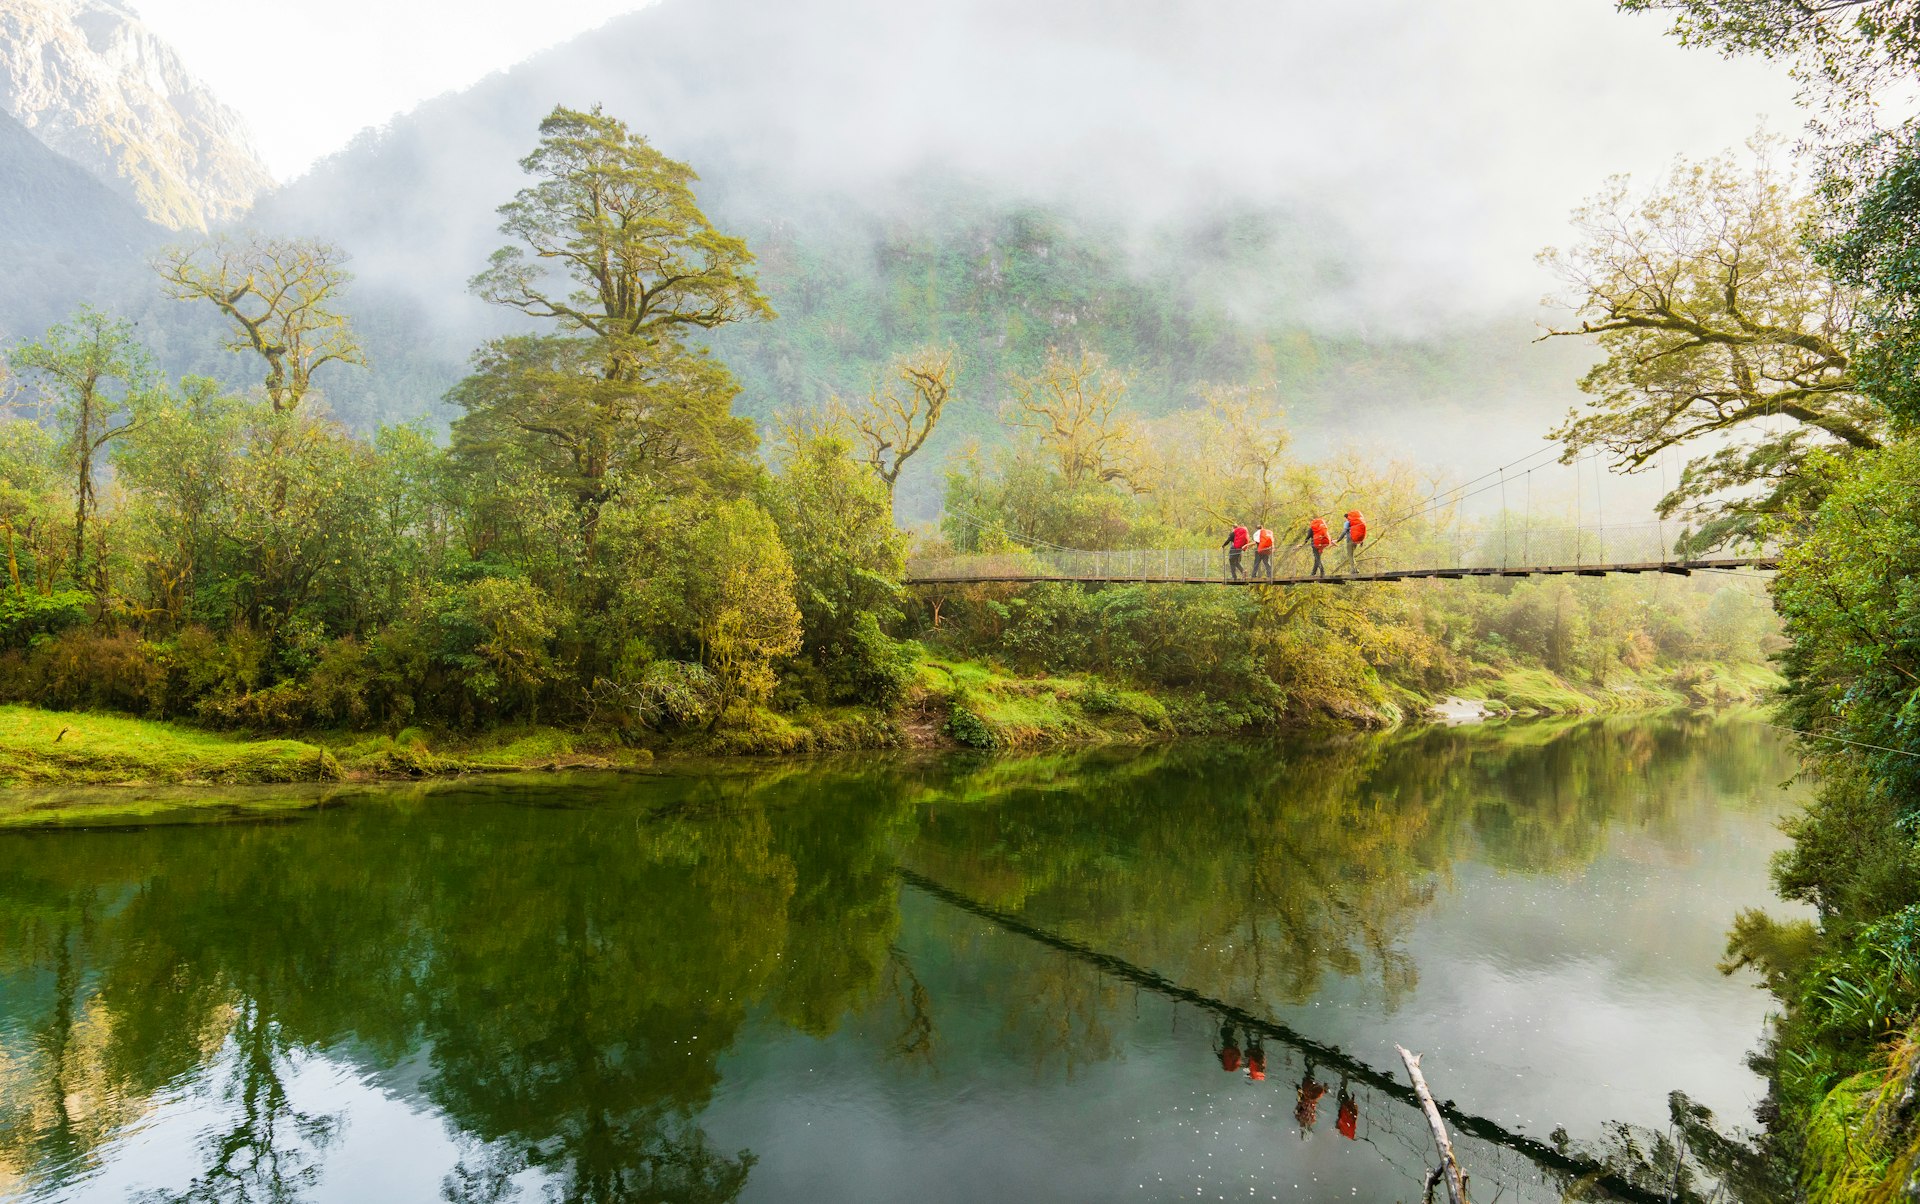 Hikers cross a bridge suspended above a river on a misty day